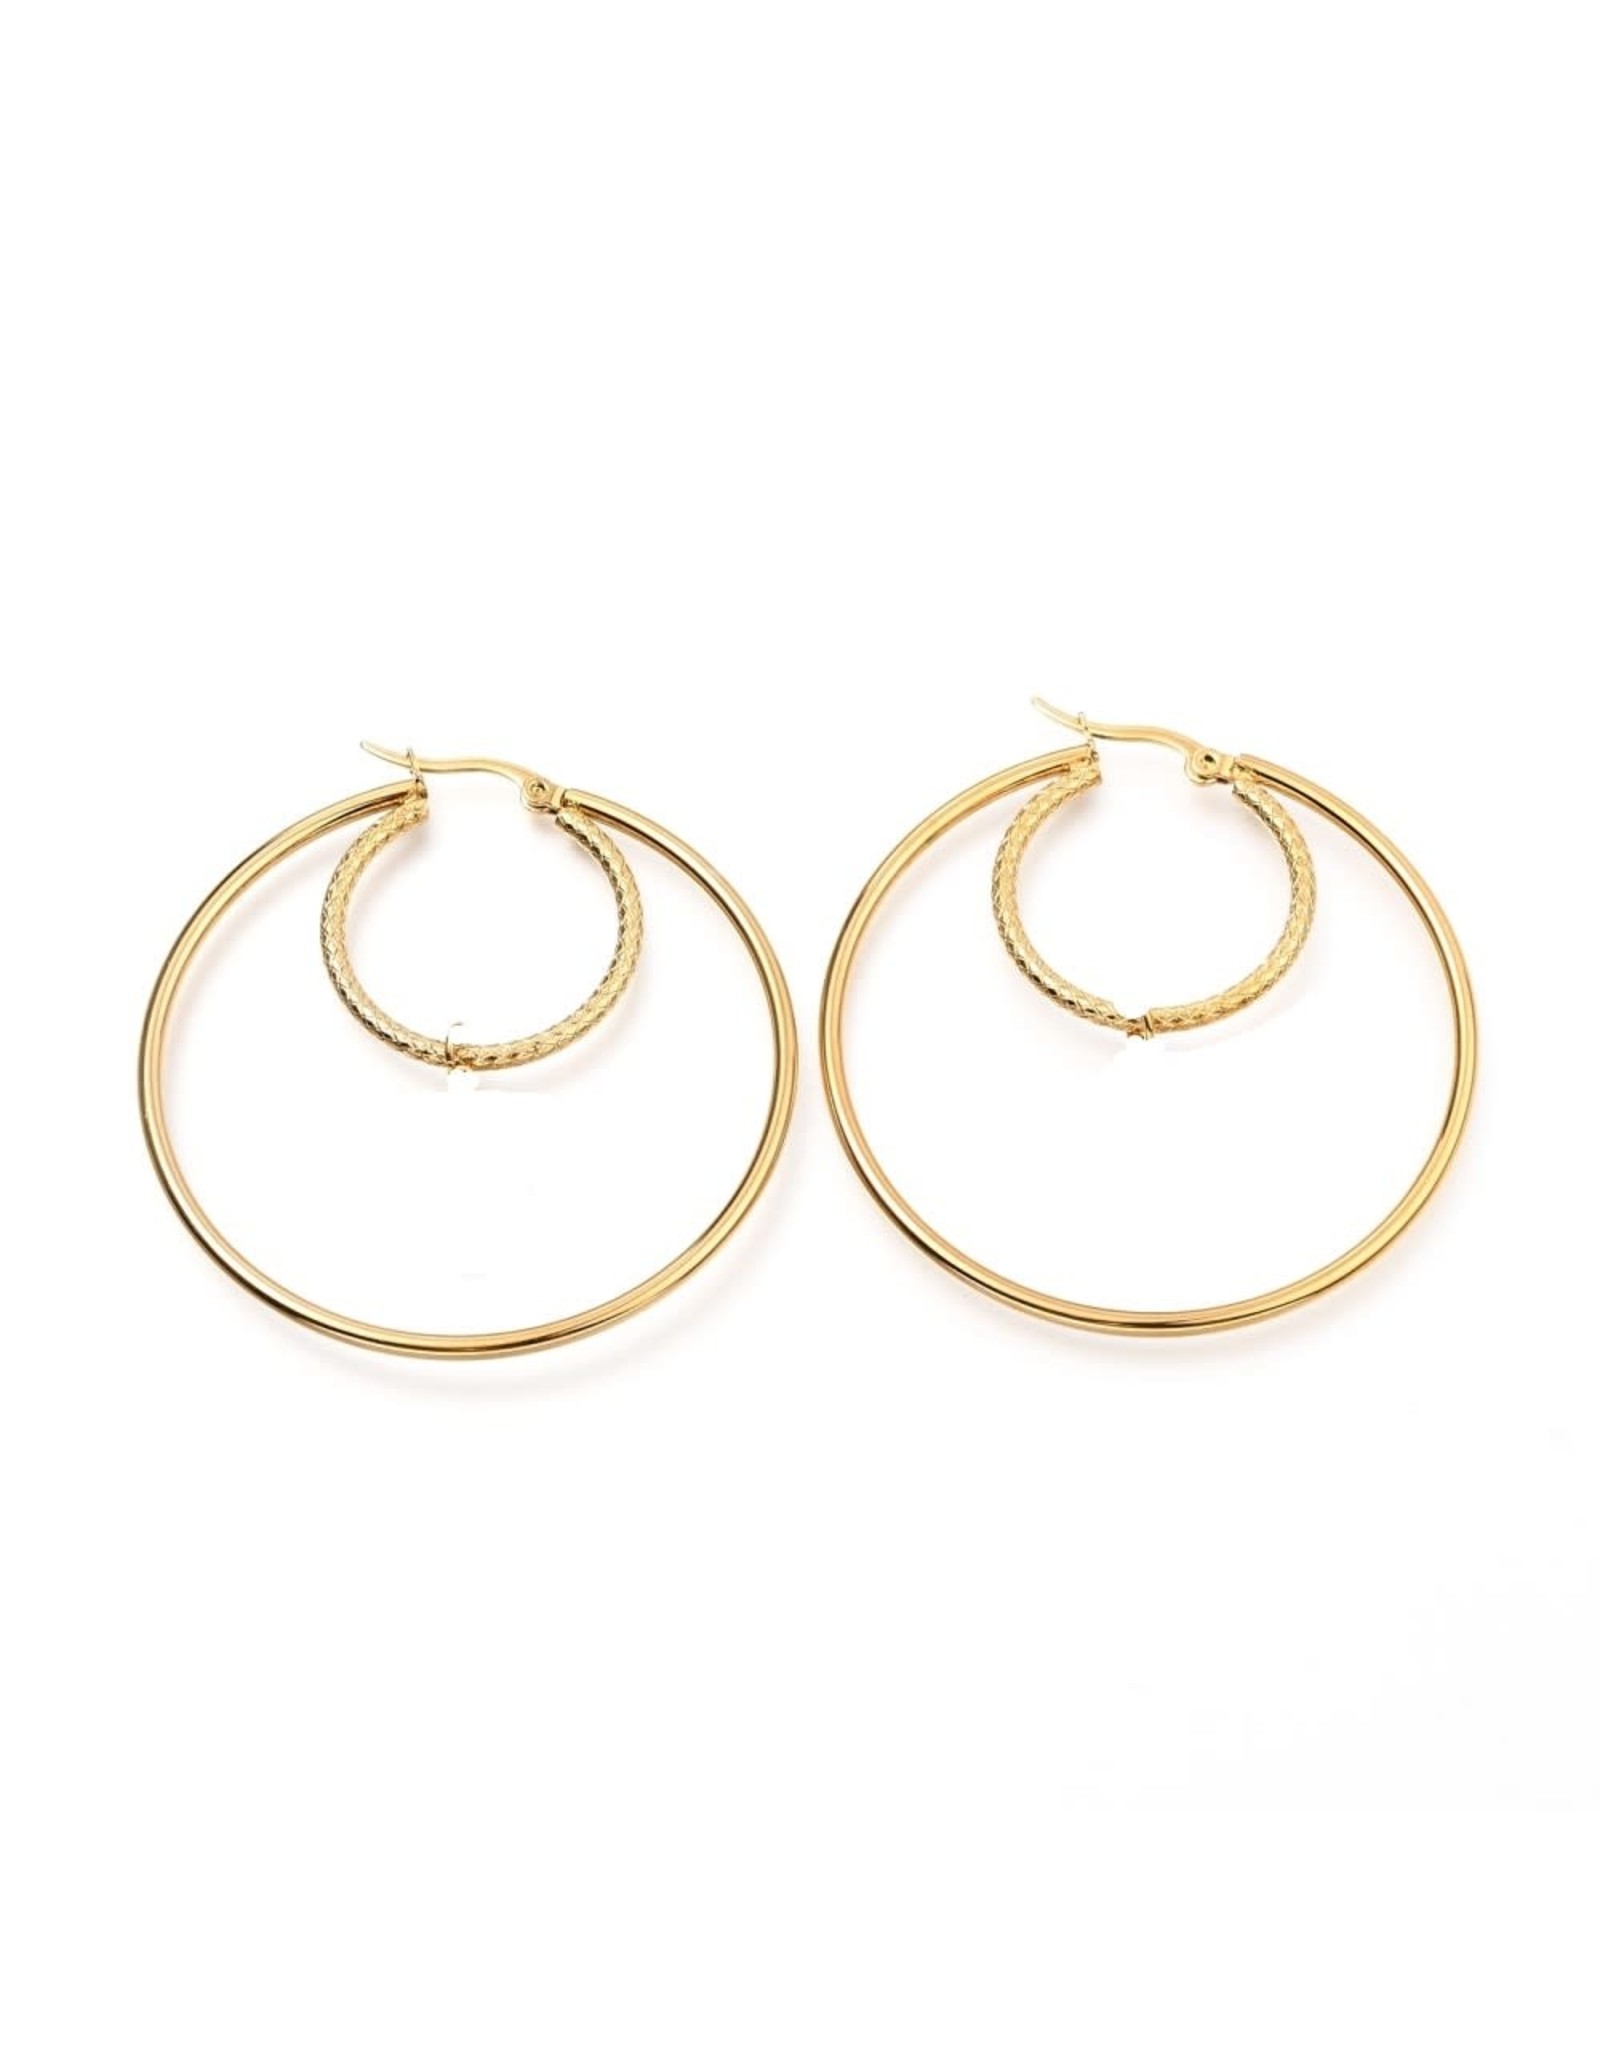 Hoop Earring Smooth/Twisted Round 54mm Gold Stainless Steel  x1 Pair